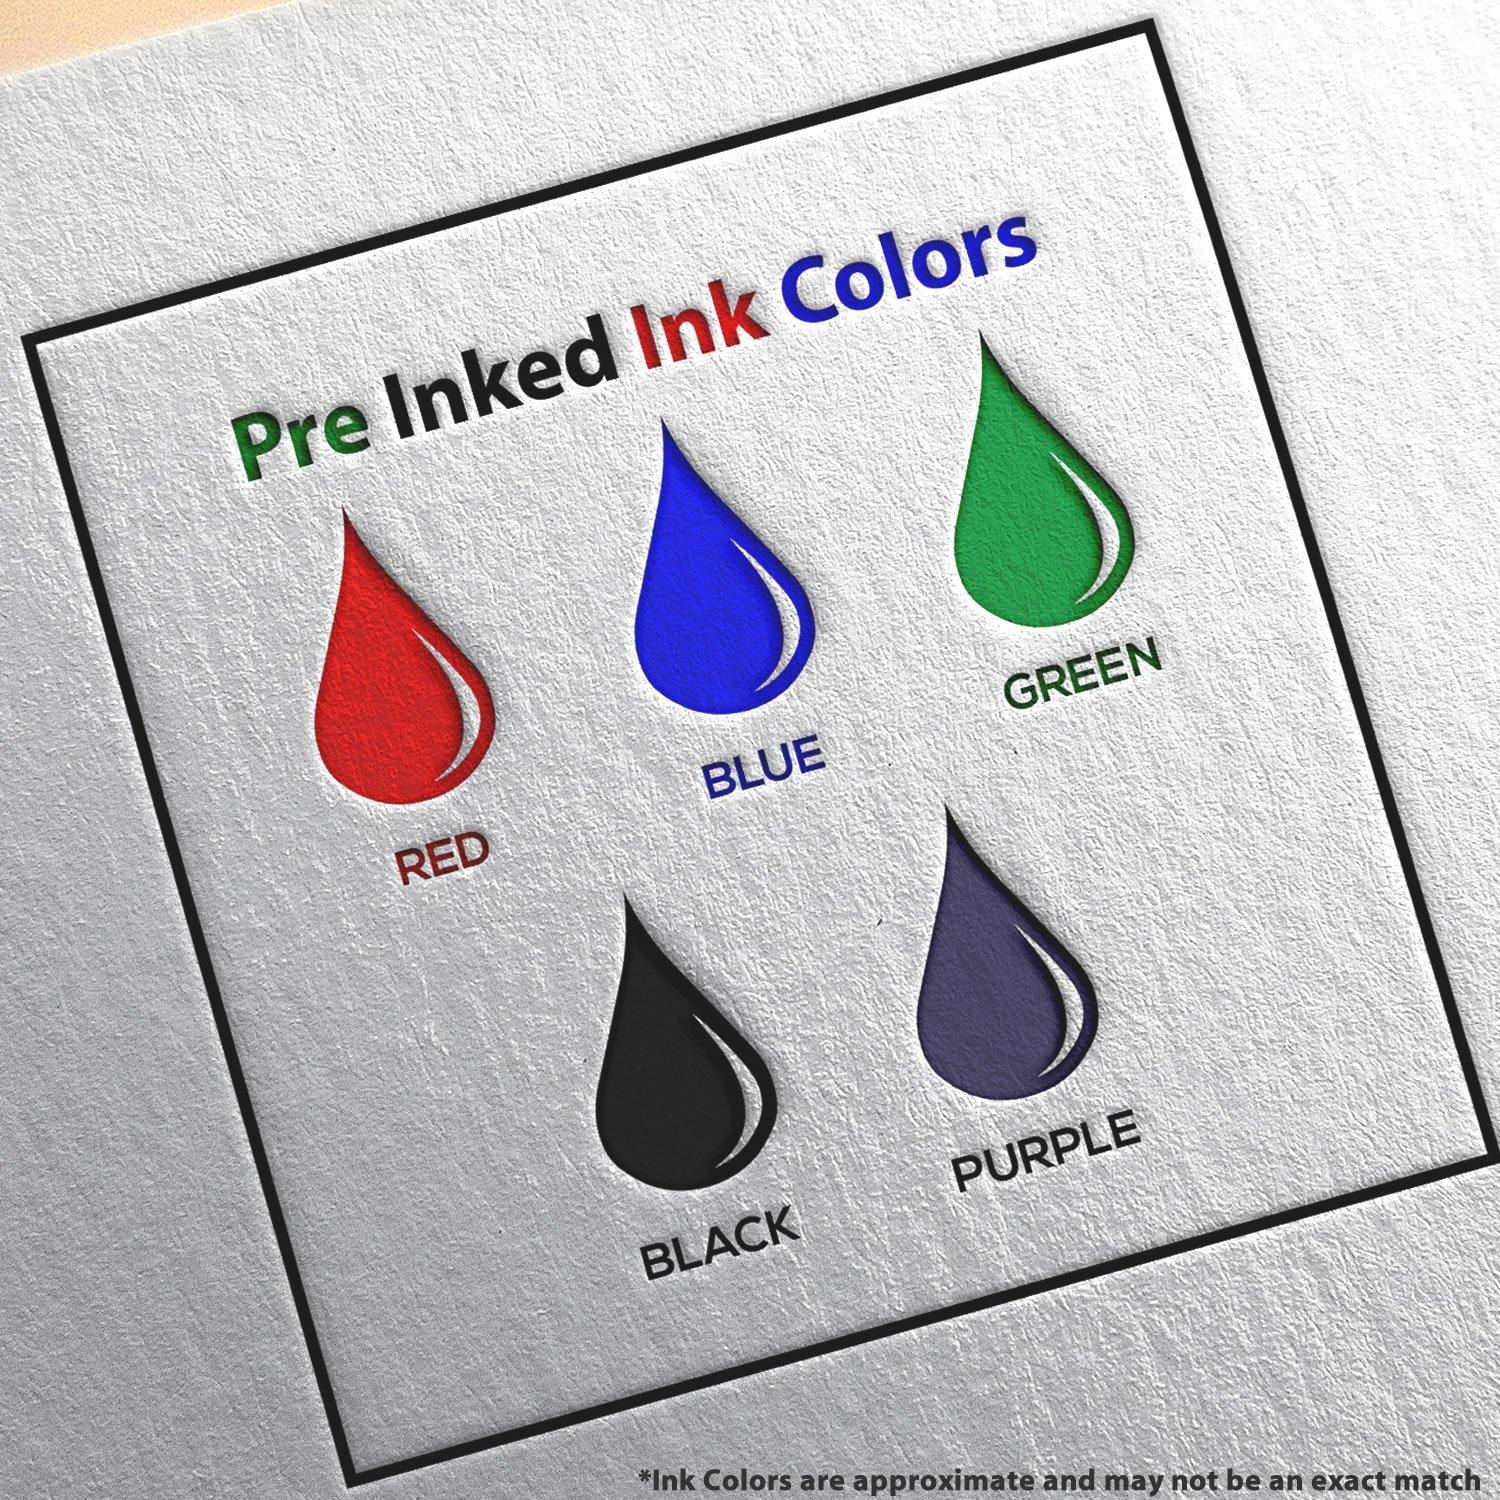 Slim Pre-Inked Received Without Contents Stamp Ink Color Options